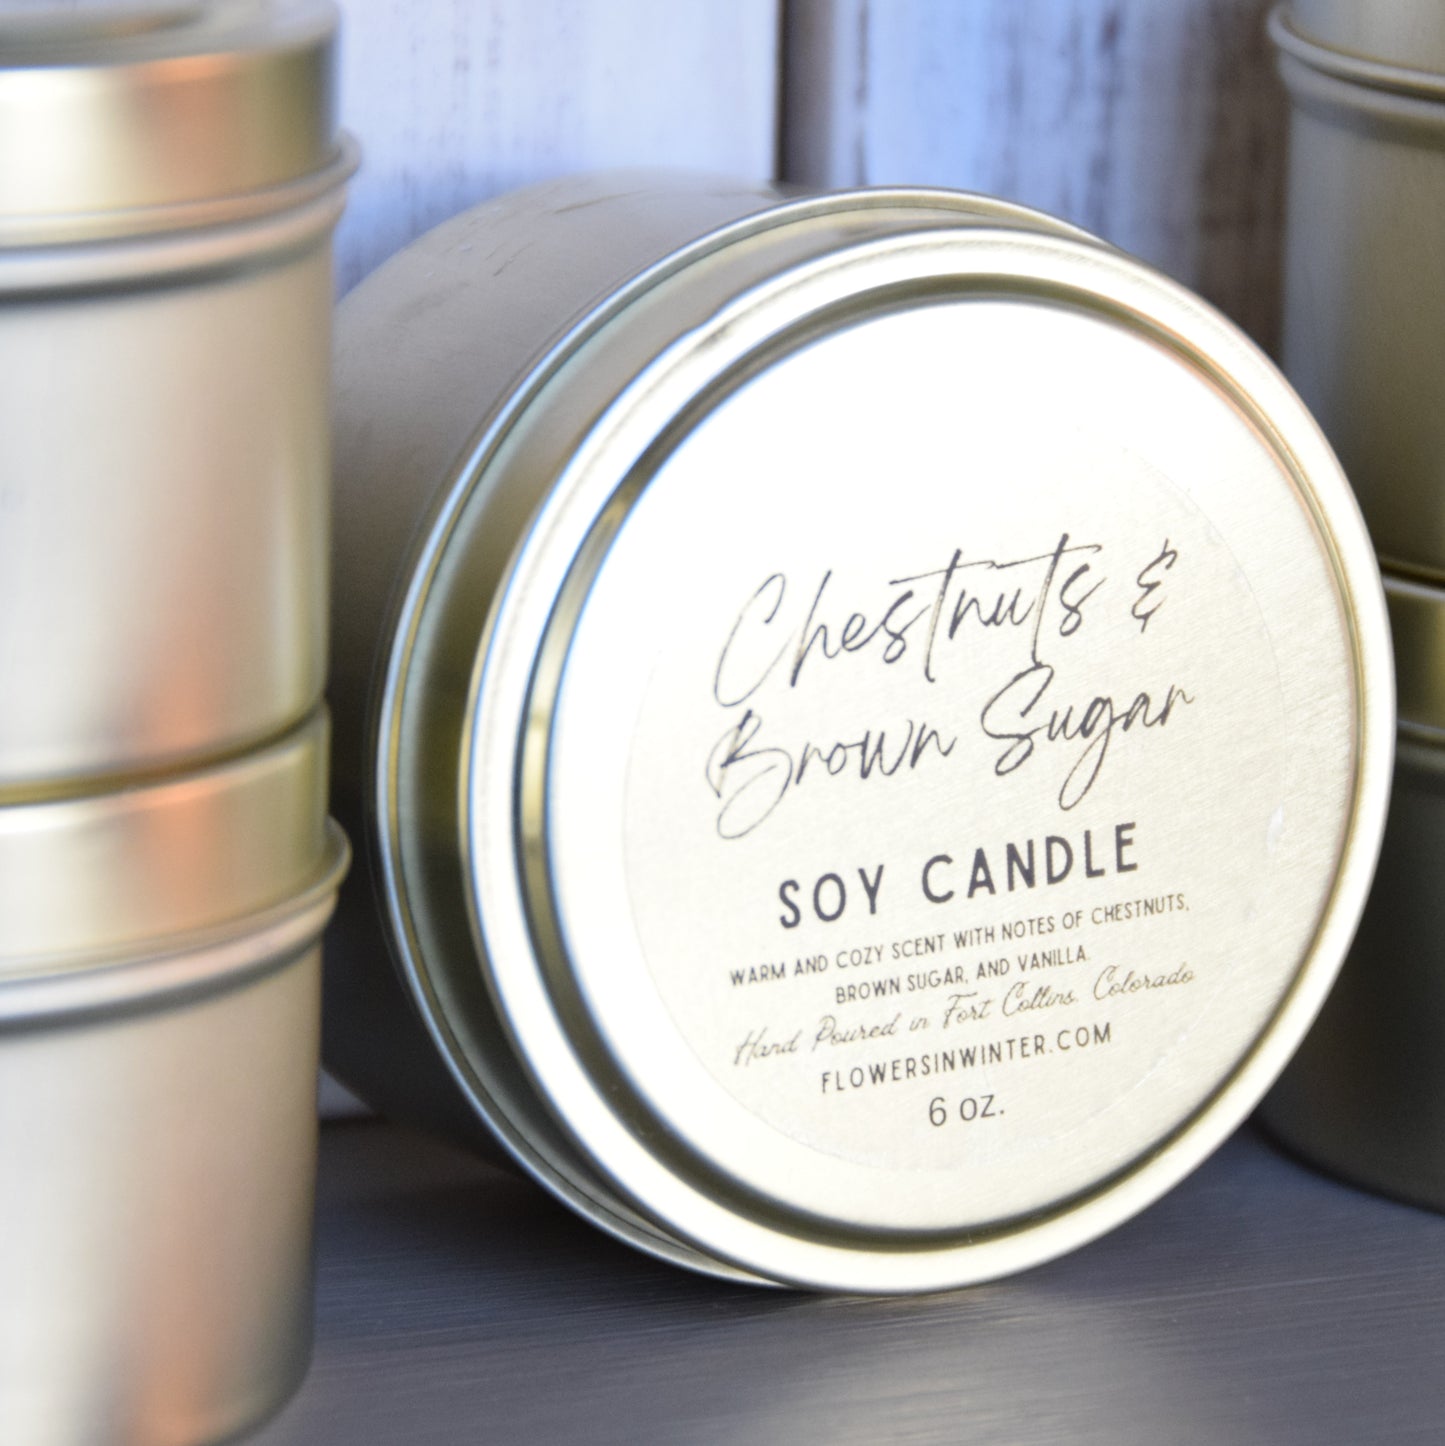 Chestnuts & Brown Sugar Soy Candle - Flowers in Winter Shop